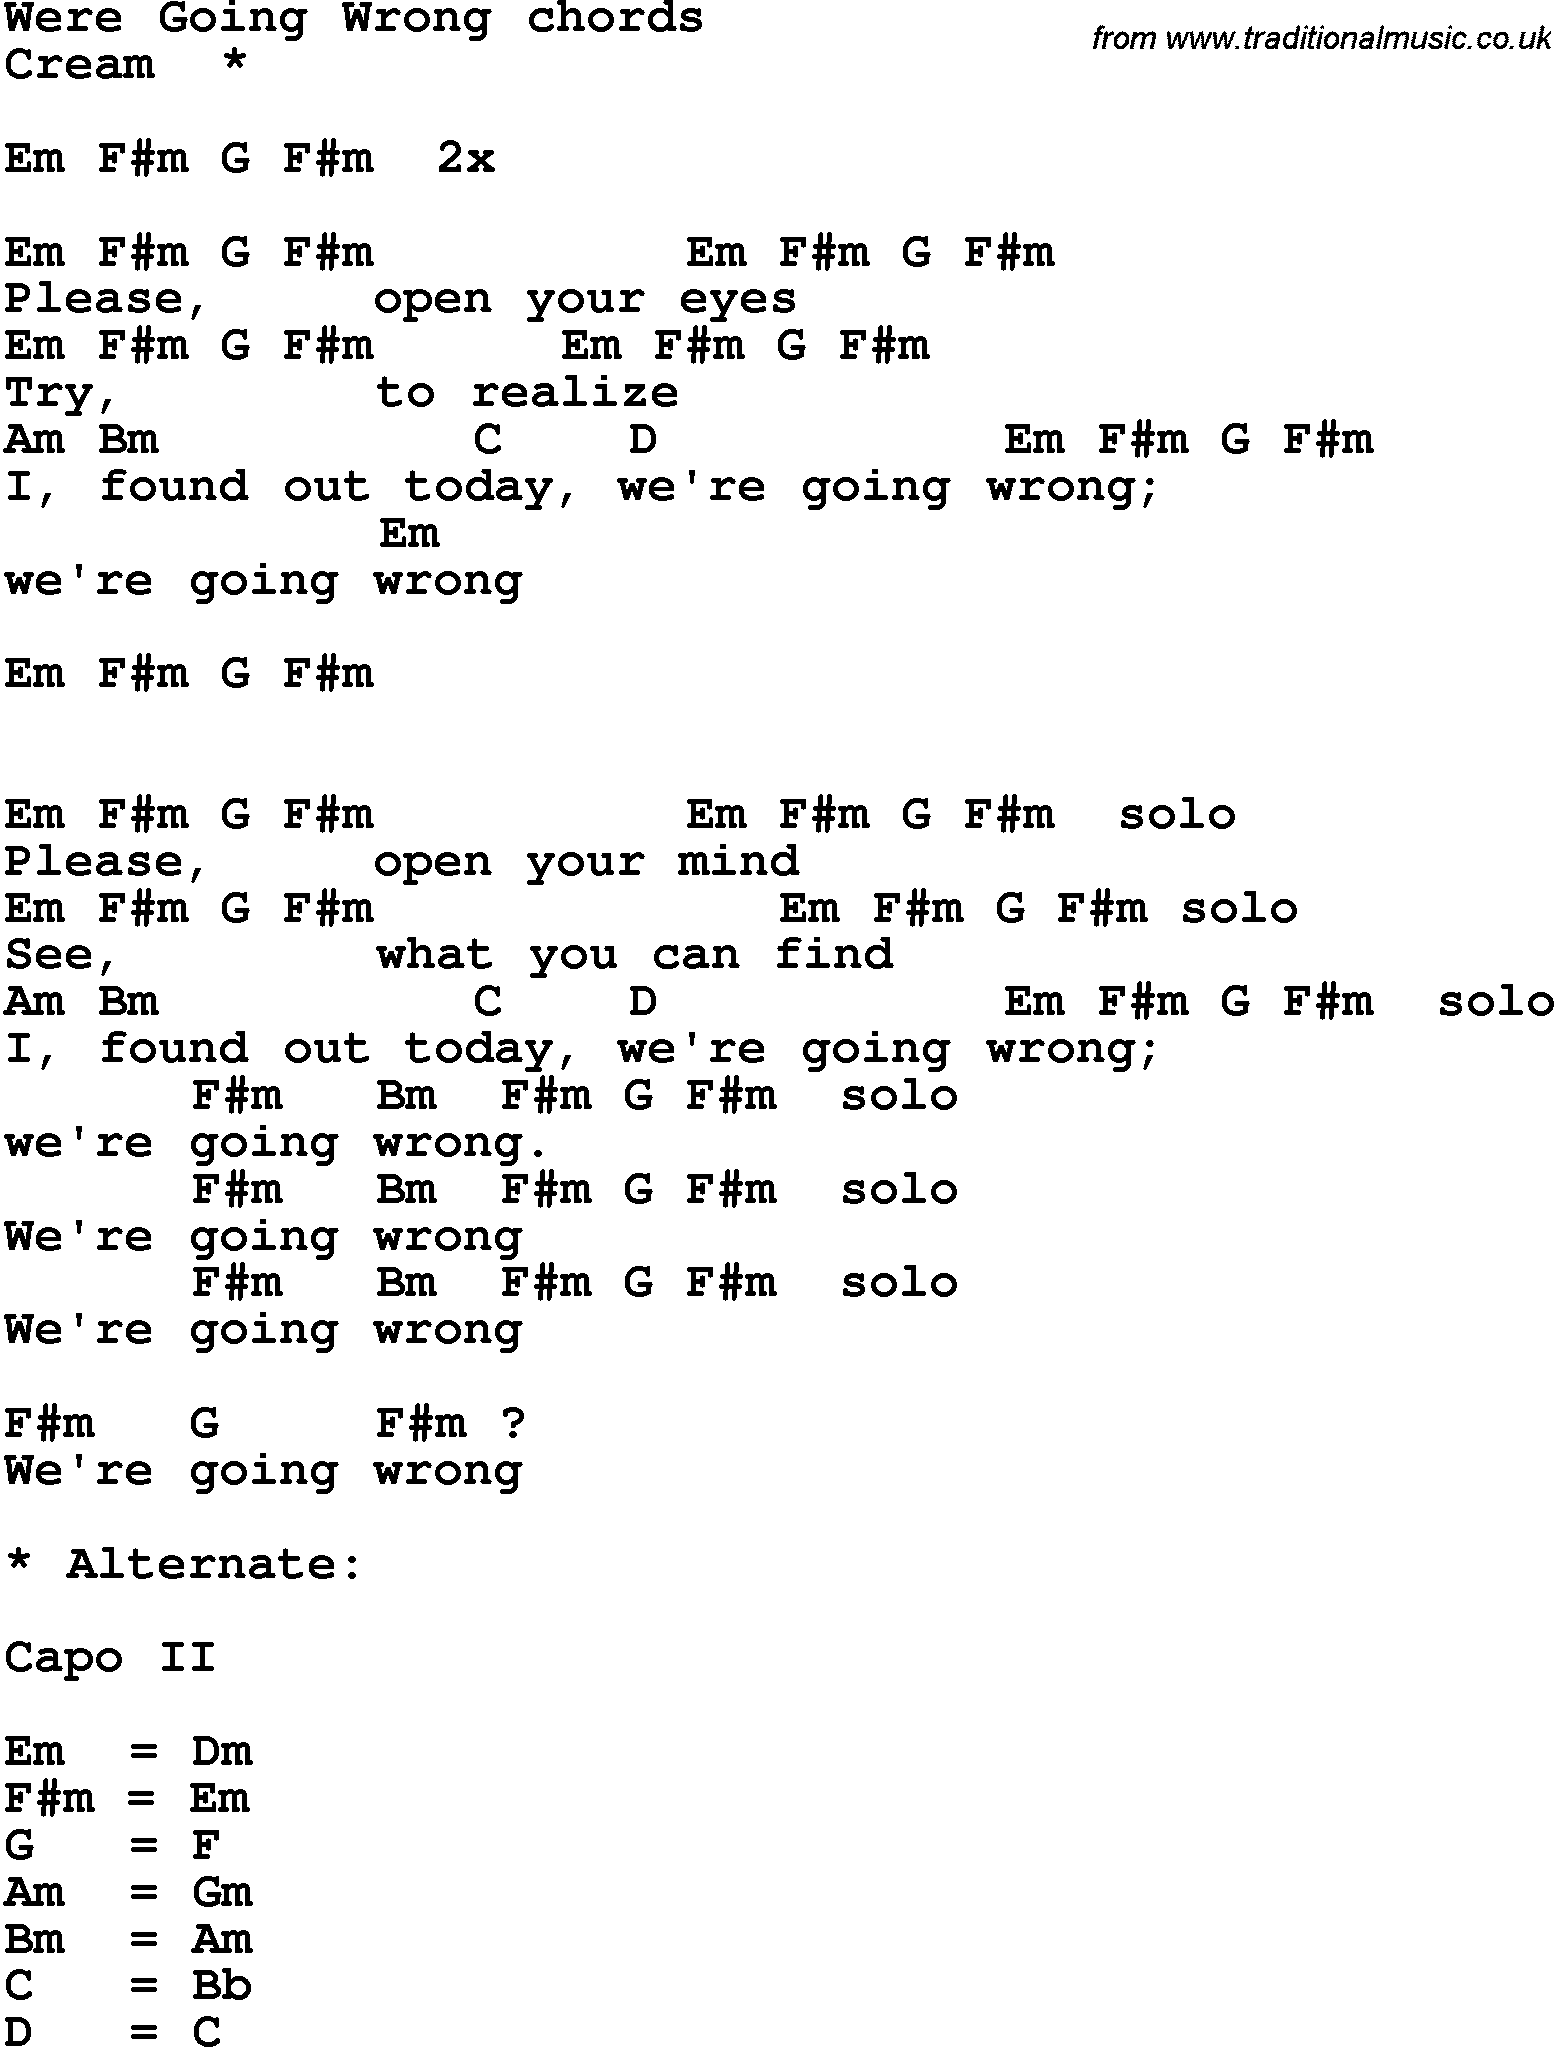 Song Lyrics with guitar chords for We're Going Wrong